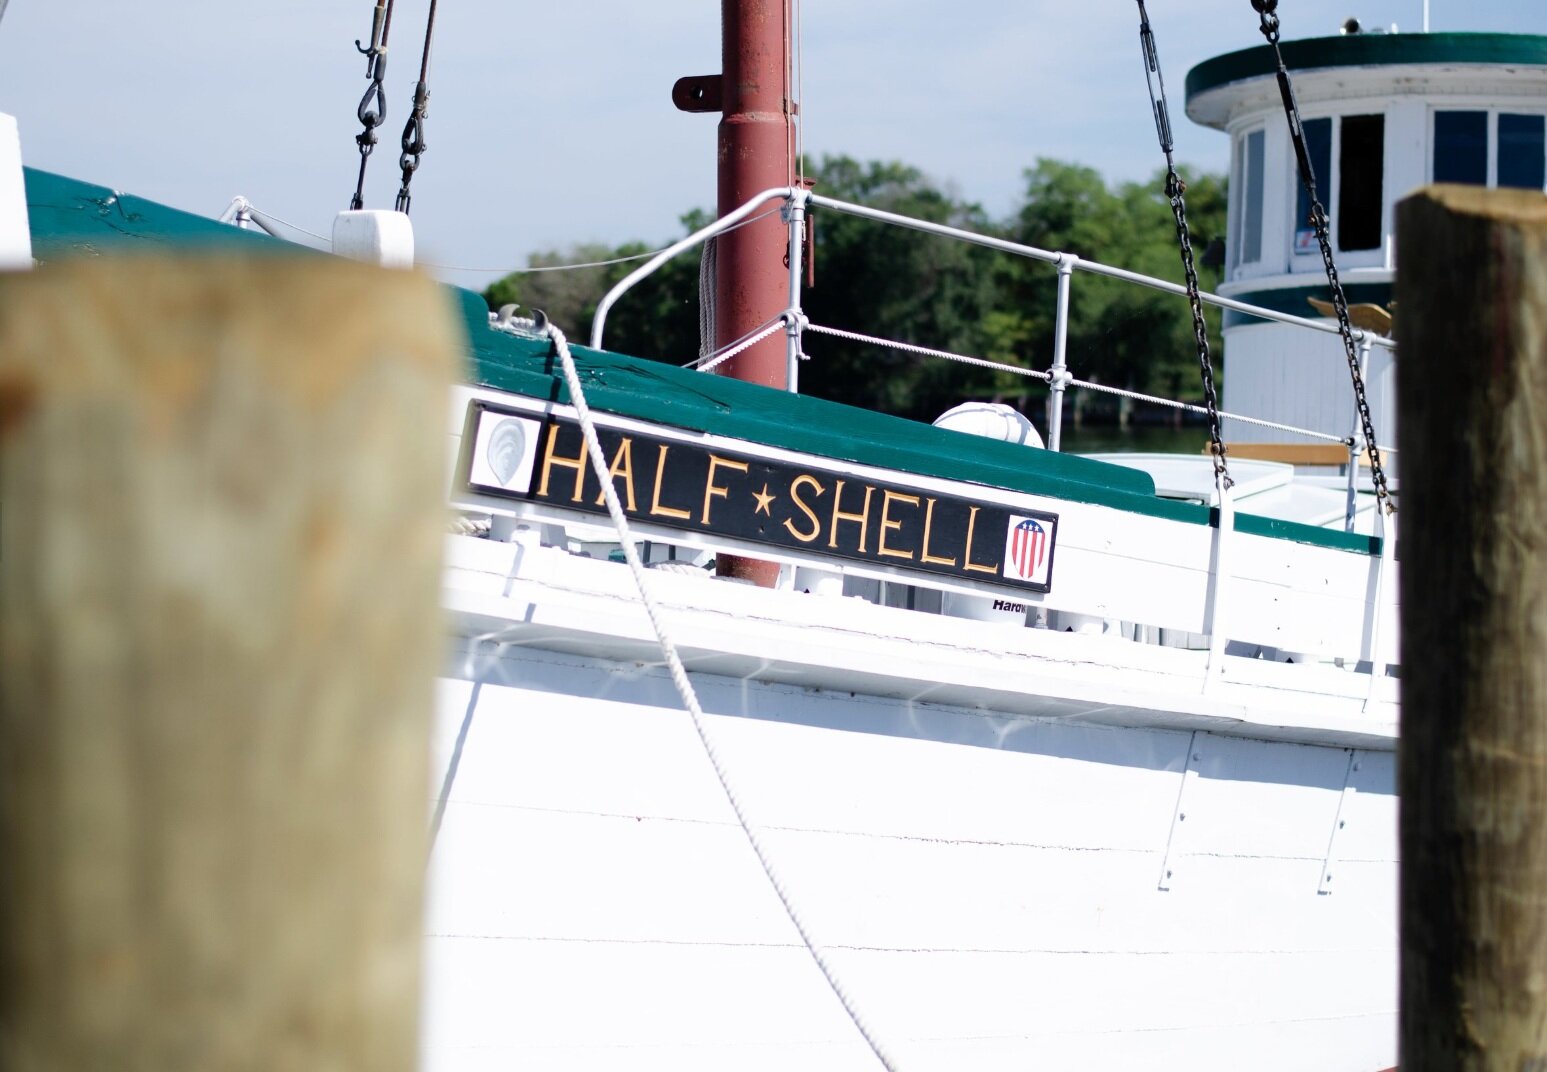  Half Shell’s old quarter board, featuring the Washington, D.C. flag and an oyster shell. 